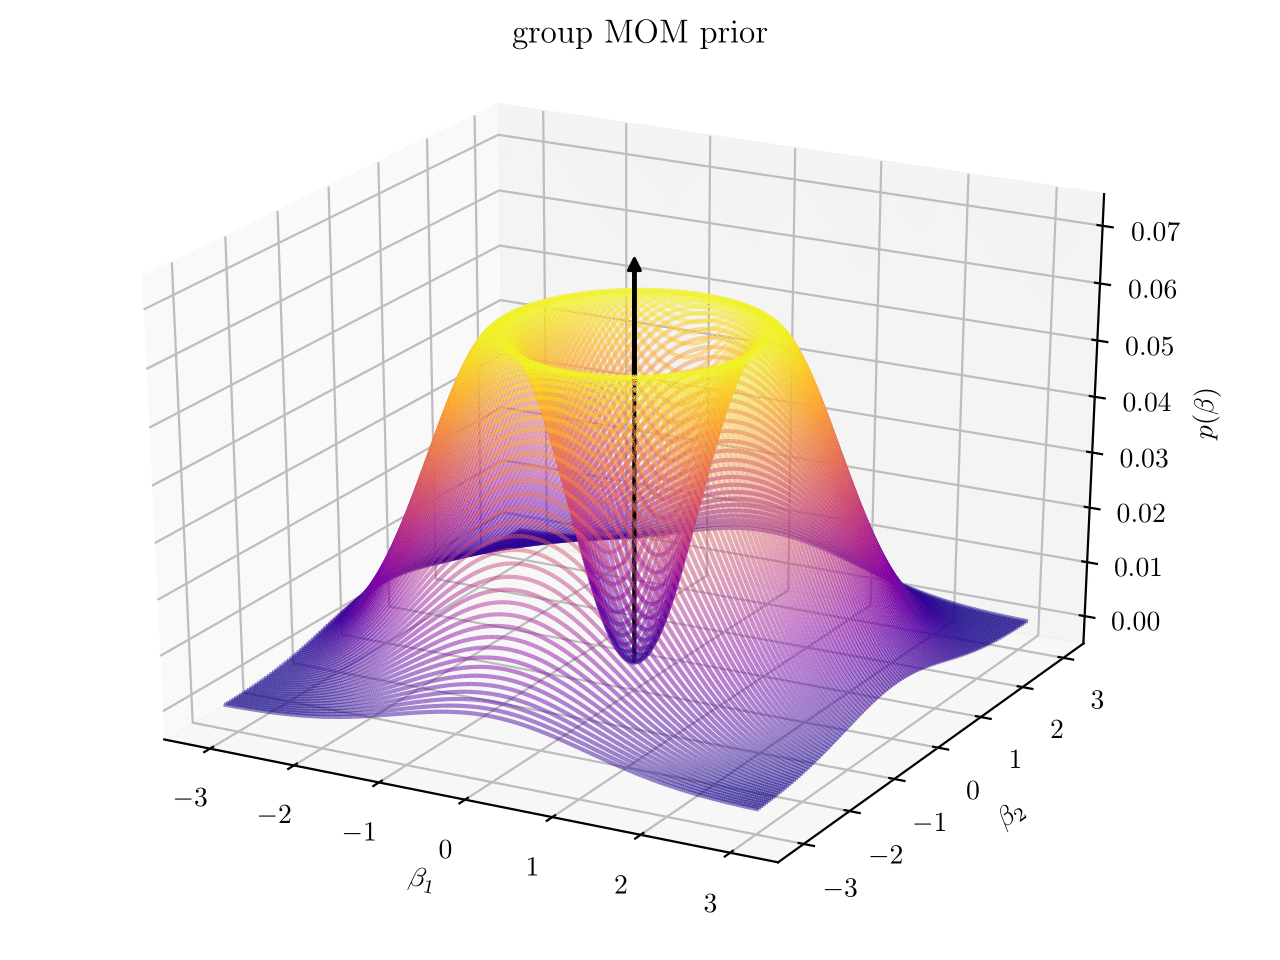 3d waterfall-type plot of a MOM prior which has a volcan-like shape